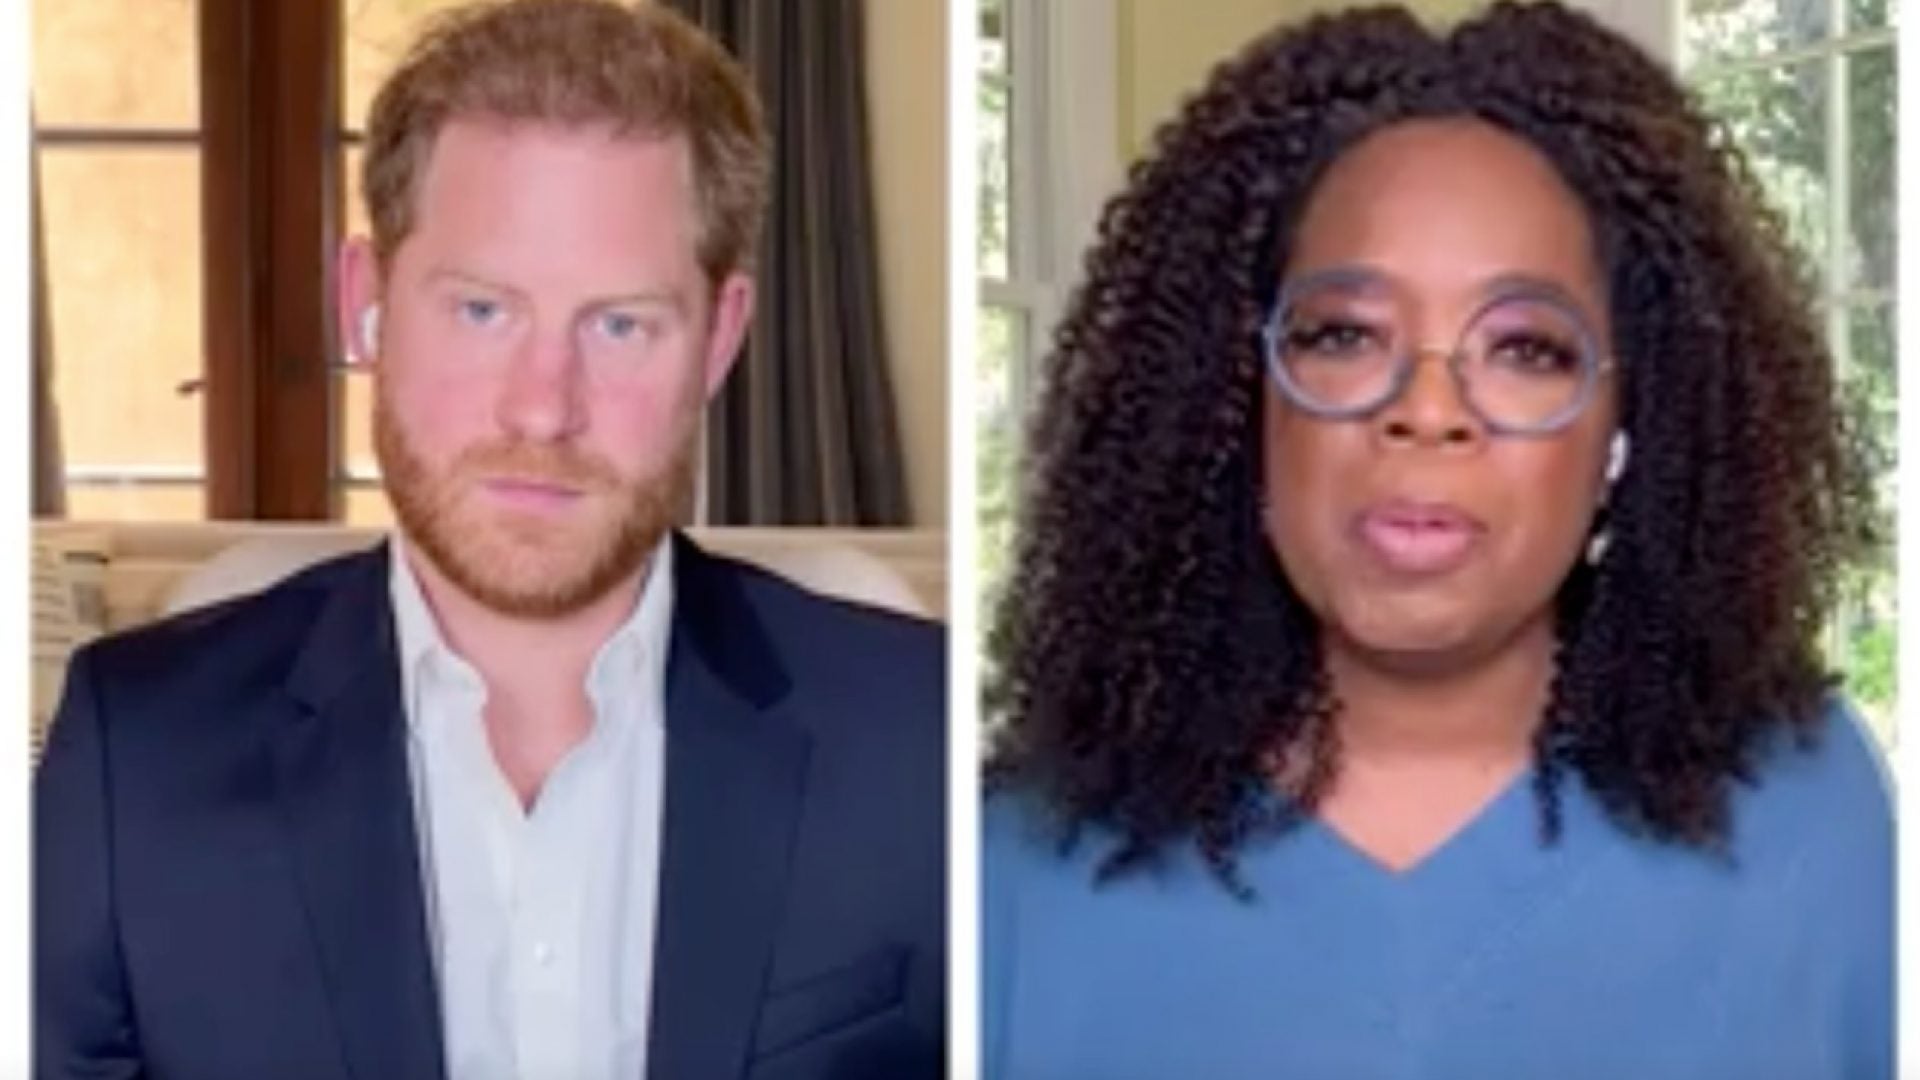 Oprah Winfrey and Prince Harry's Touching Advice For Those Who Don't Feel Seen